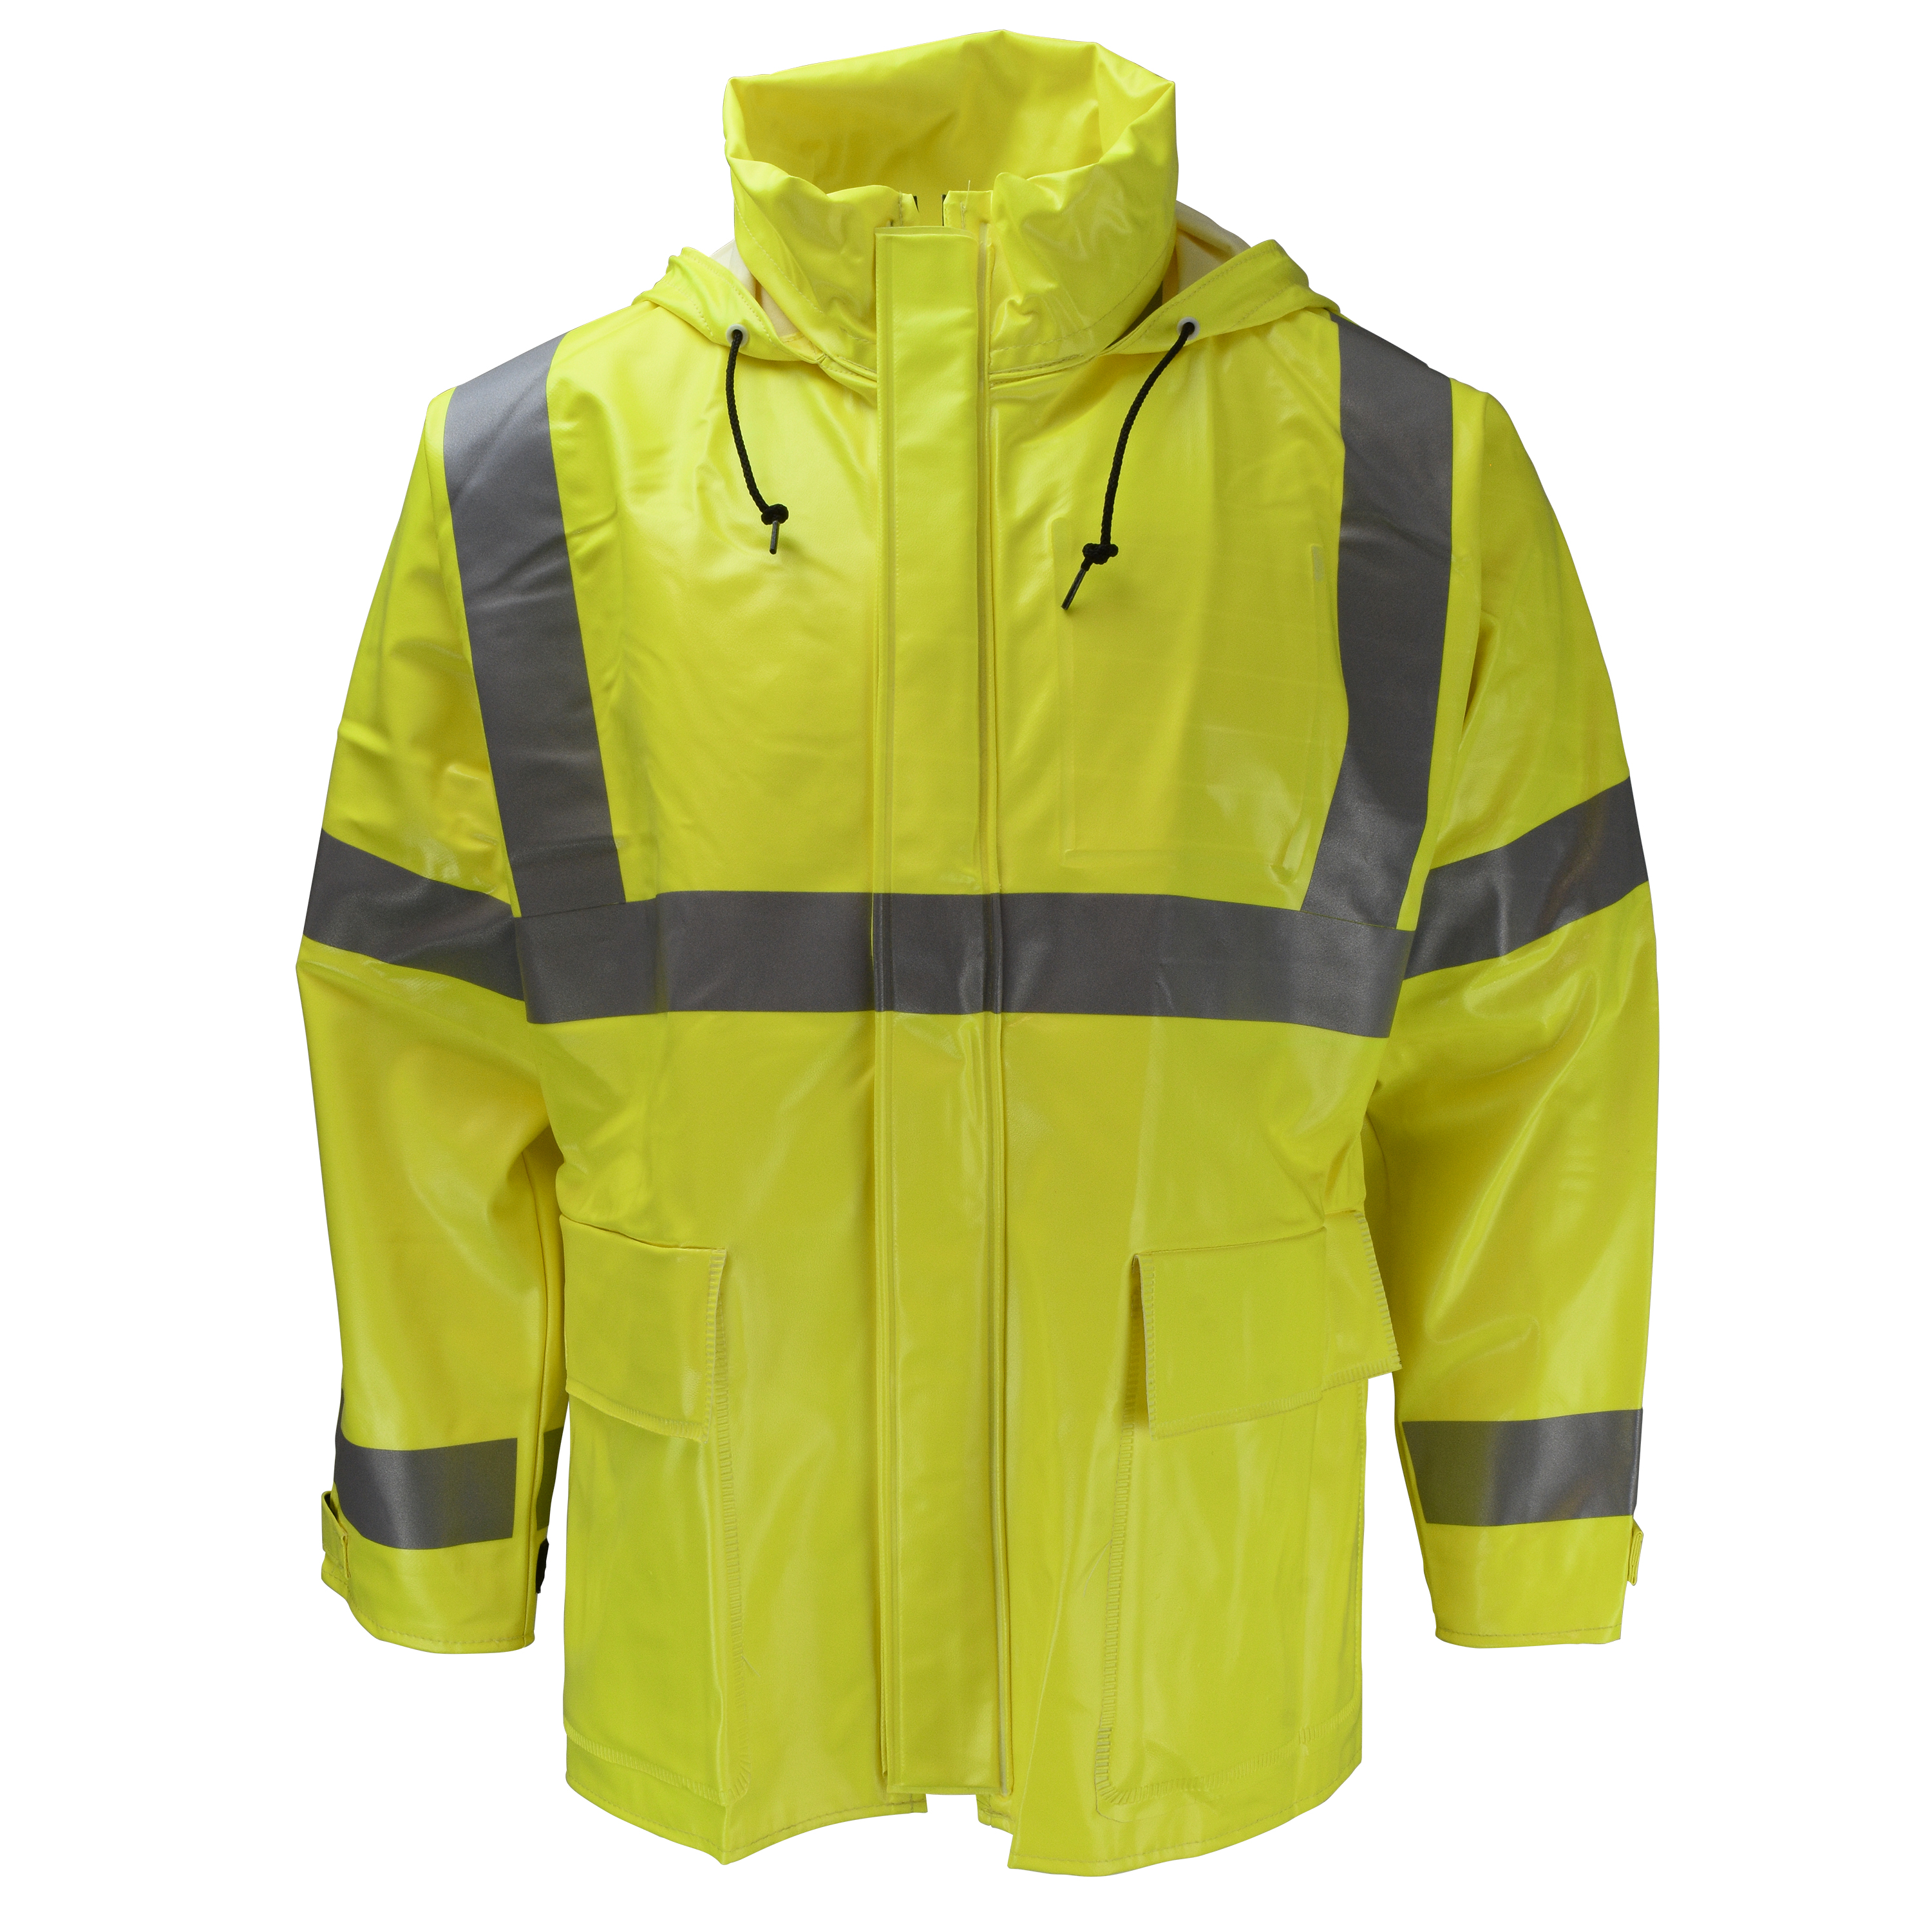 Dura Arc II Jacket with Attached Hood - Hi-Vis Lime - Size L - Arc Flash